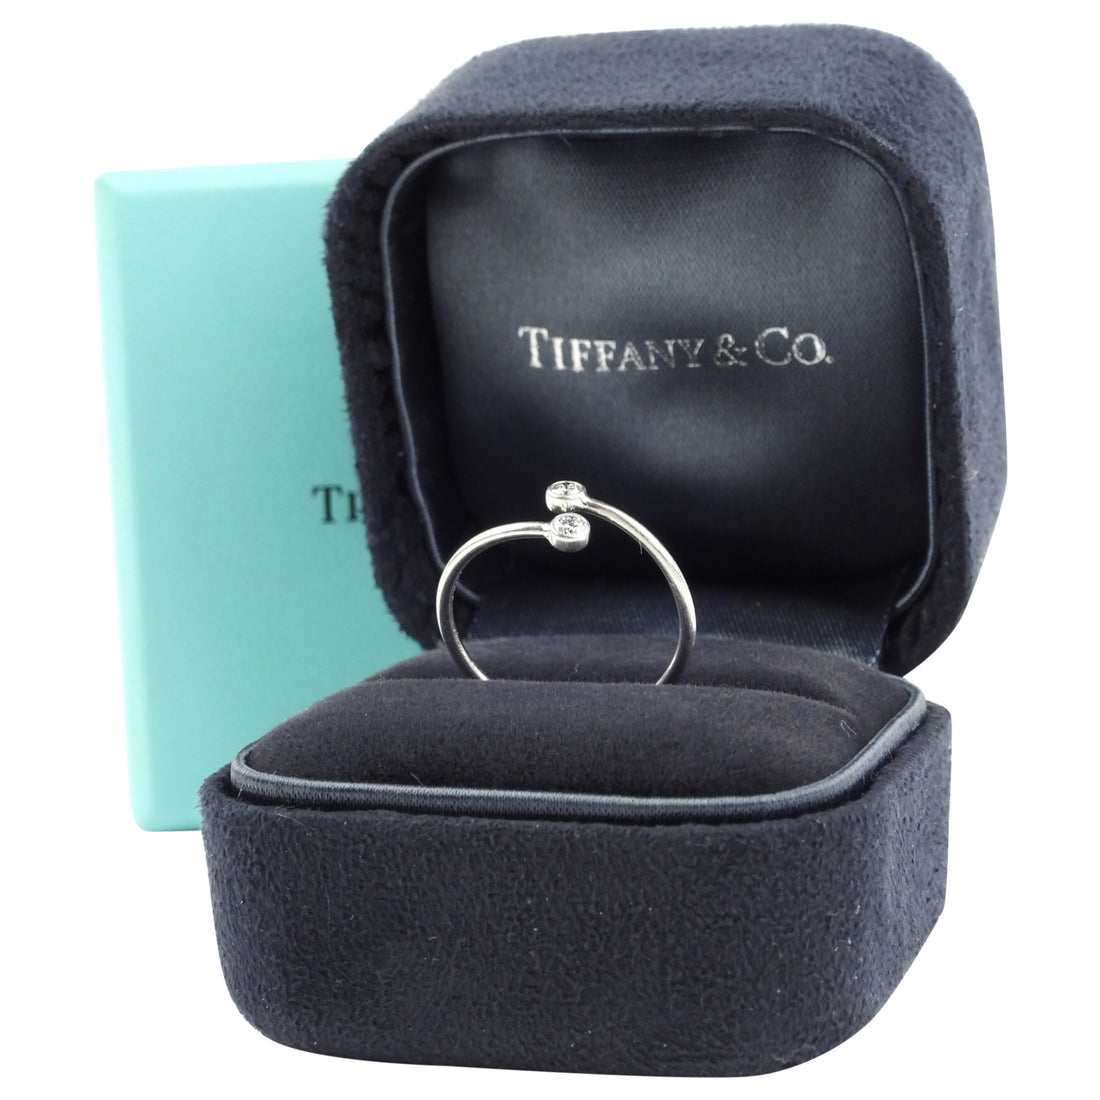 Tiffany & Co. Women's Rings - Appraised Luxury Rings - 58 Facettes